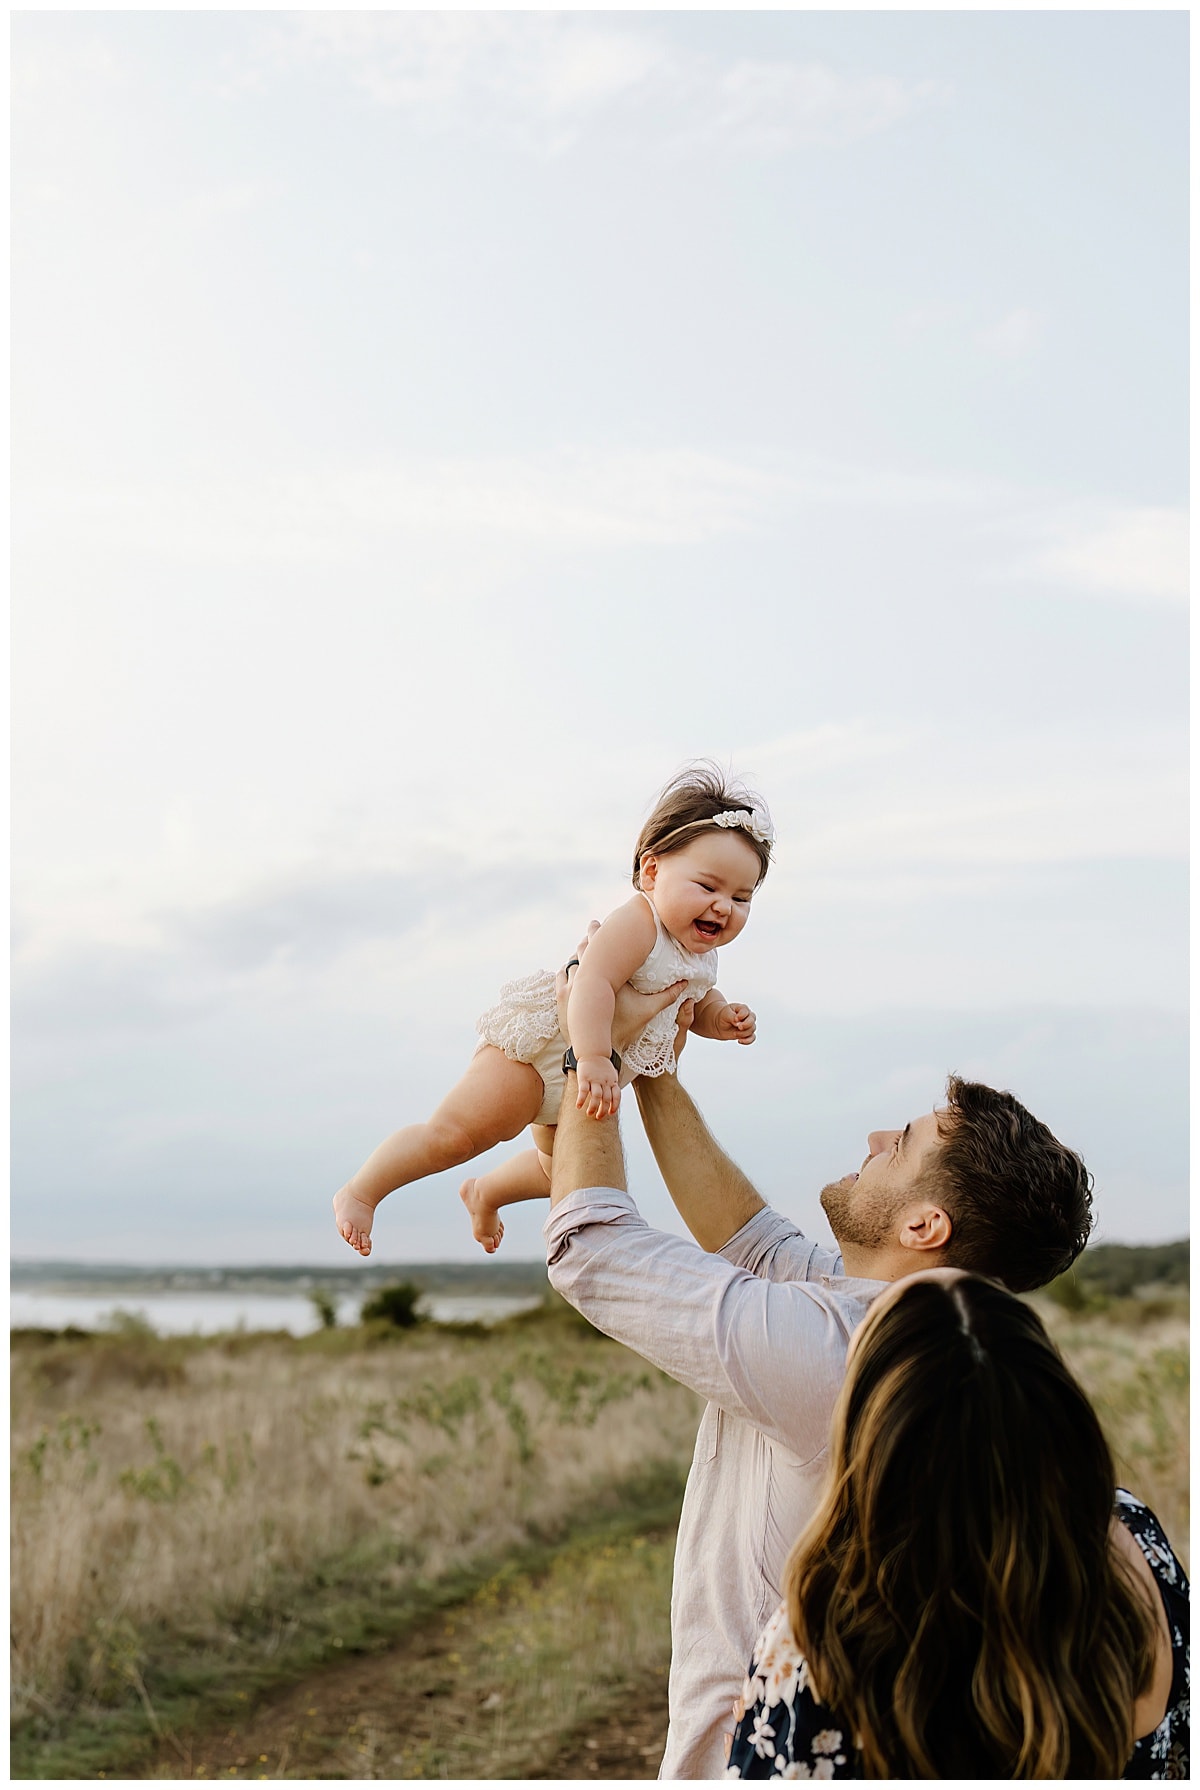 Dad throws baby in the air for Our Adventuring Souls Photography